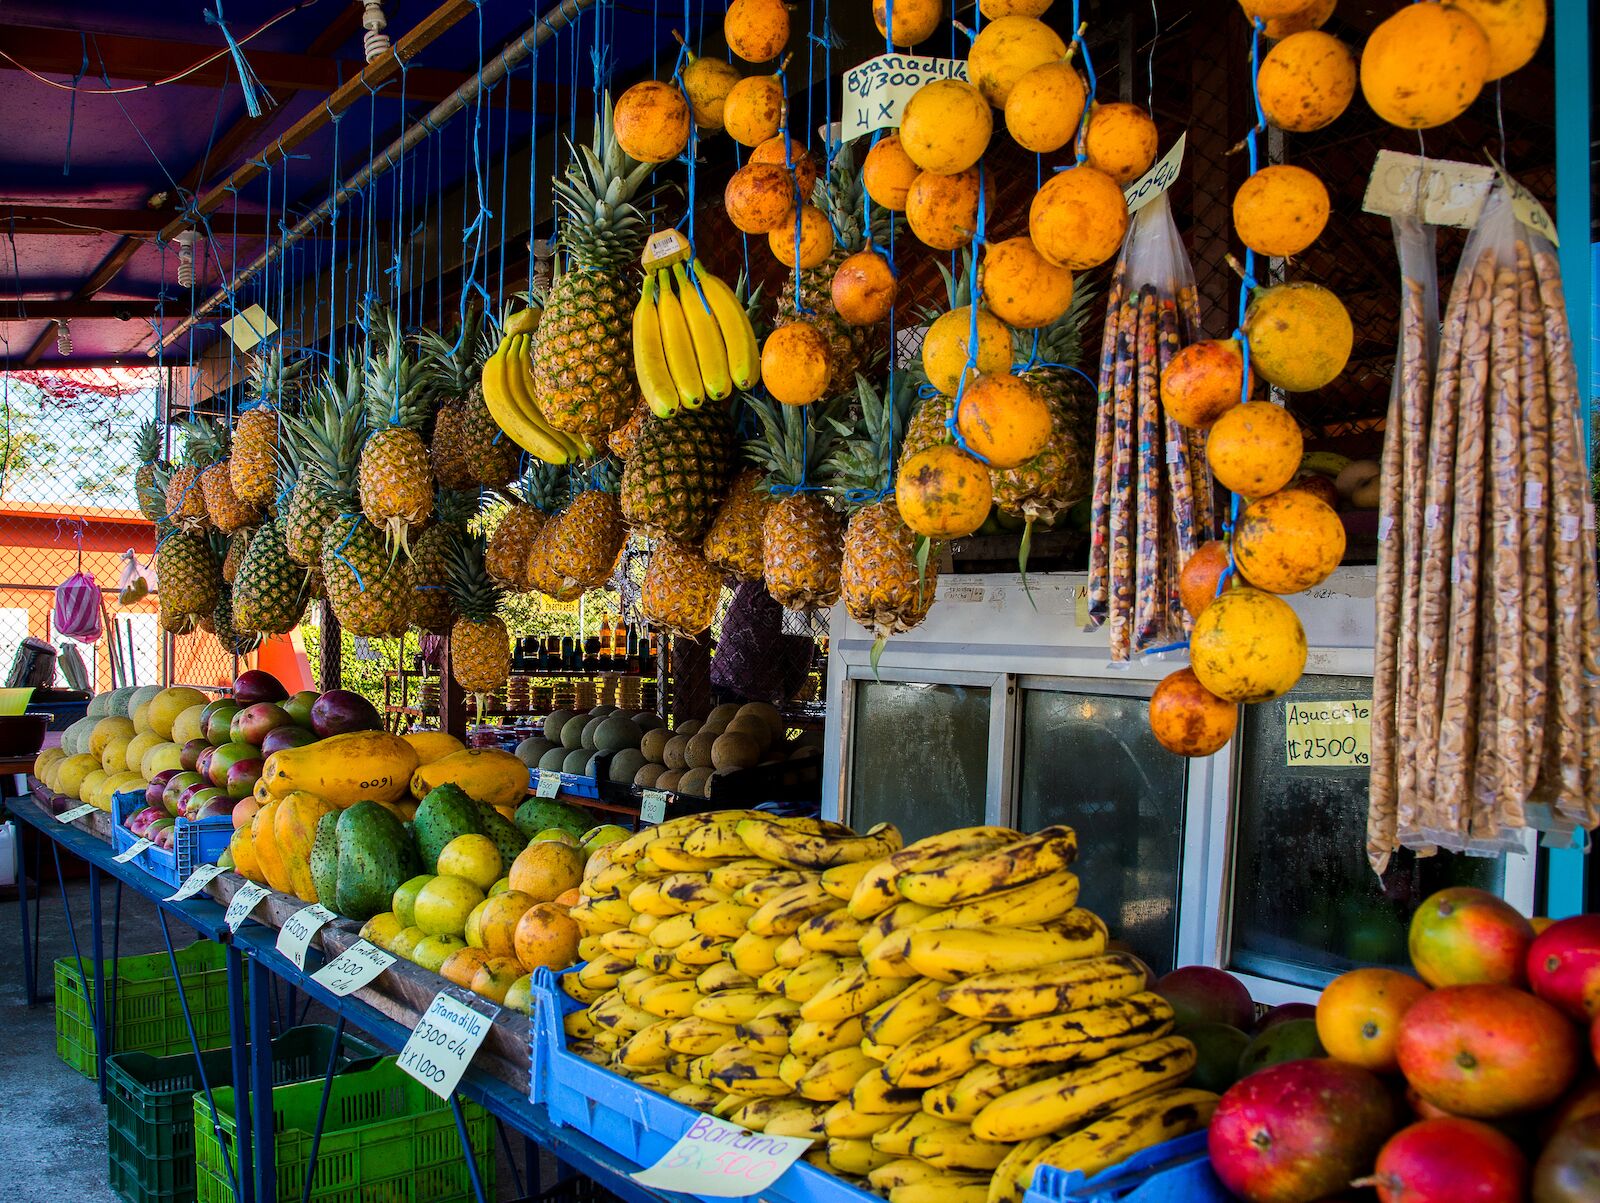 Market stall with fresh fruit in Costa Rica. Read on to know when is the best time to visit Costa Rica and eat fresh fruit